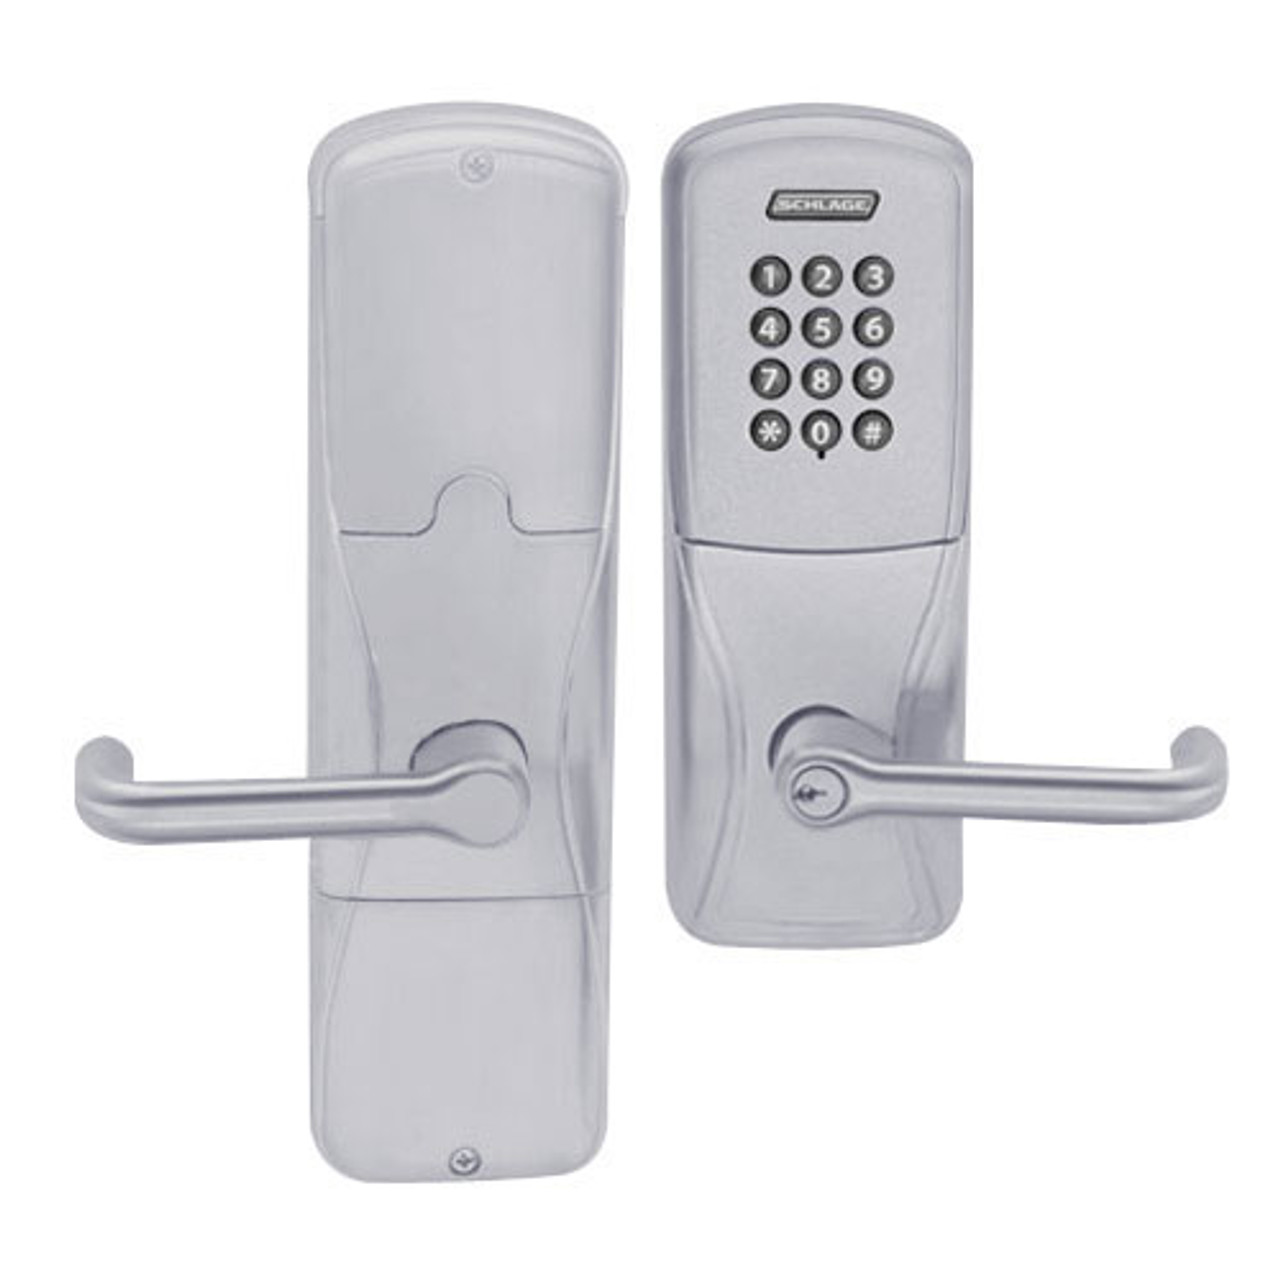 AD200-MD-60-KP-TLR-PD-626 Schlage Apartment Mortise Deadbolt Keypad Lock with Tubular Lever in Satin Chrome